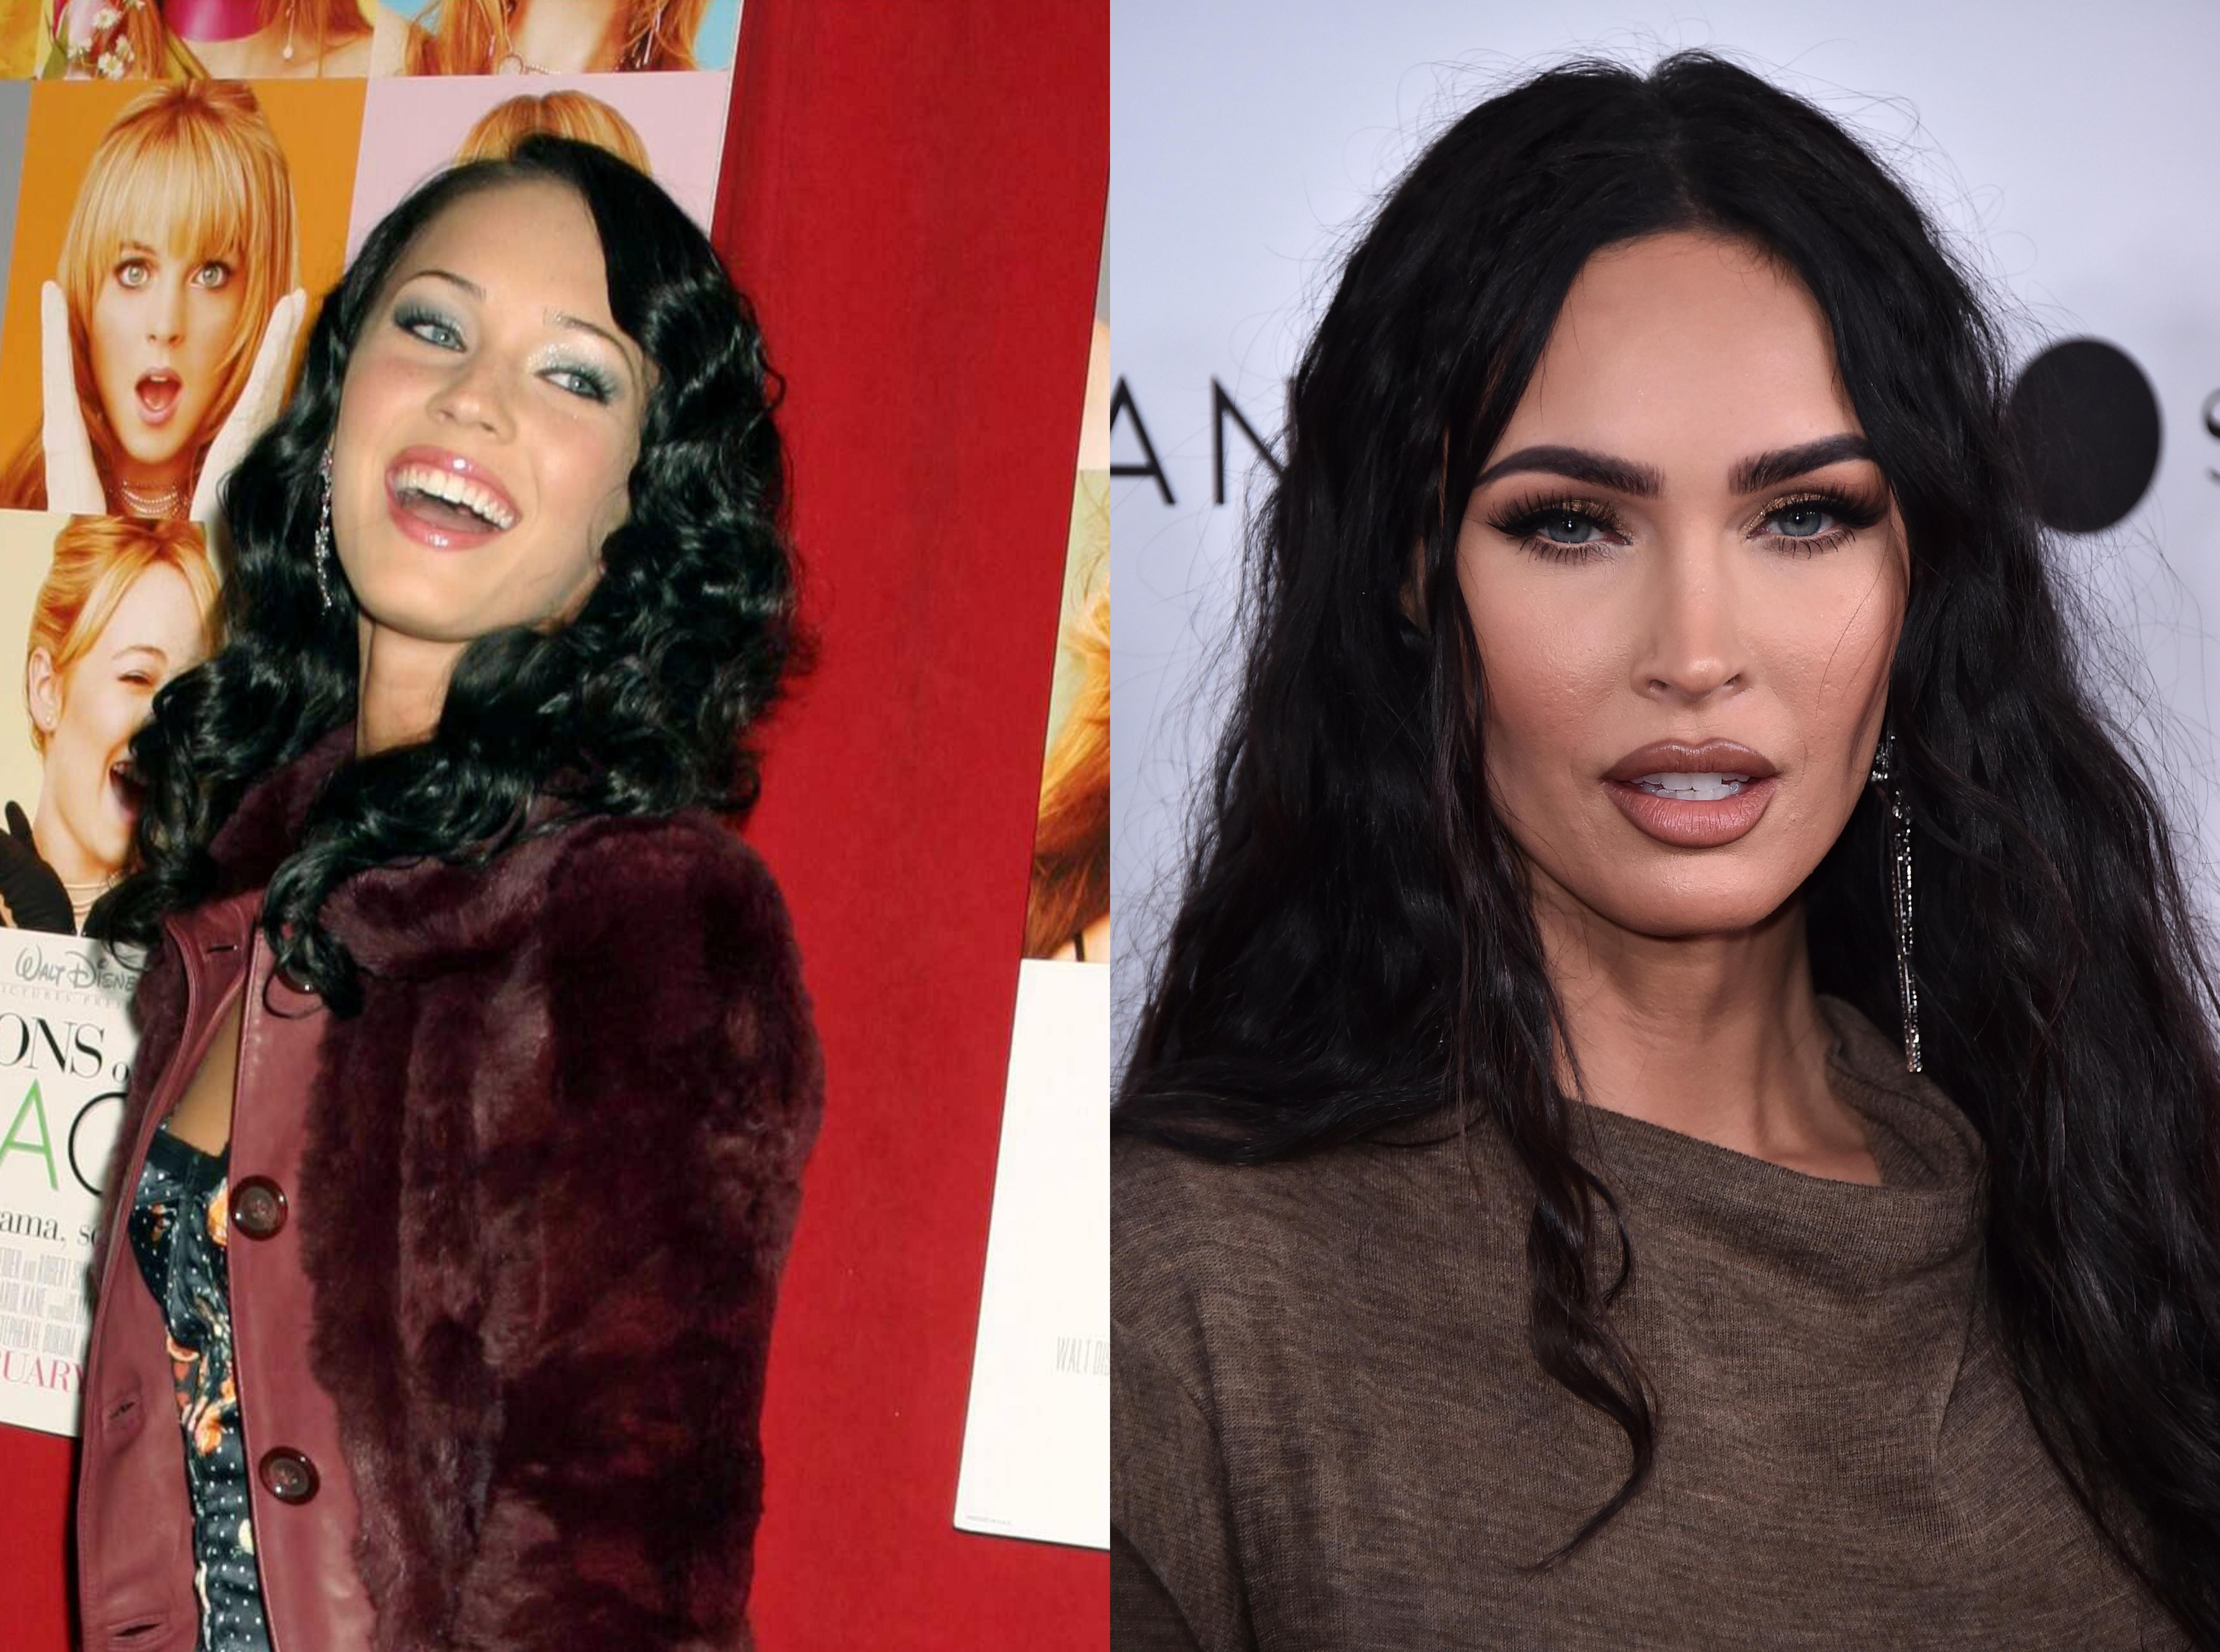 Megan Fox in 2004 and in 2022